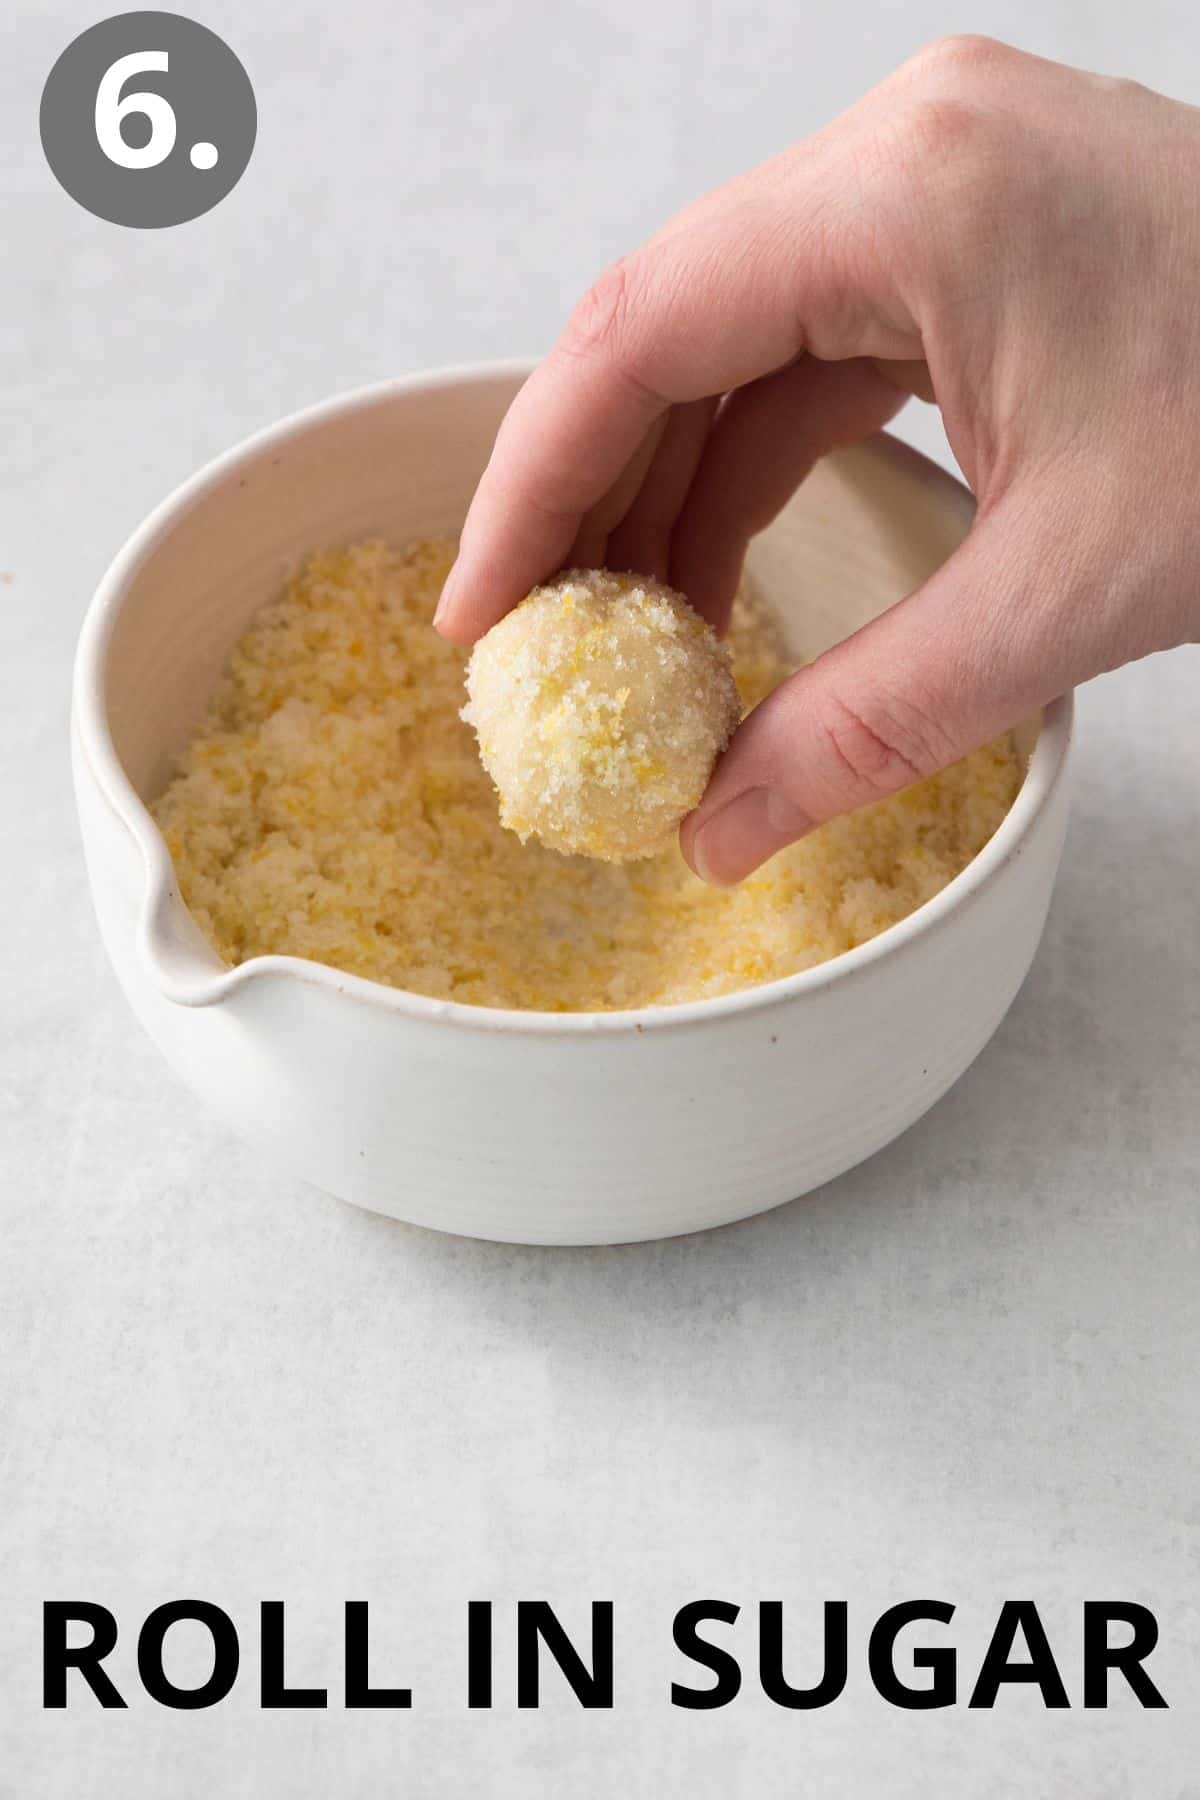 Lemon cookie dough ball rolled being rolled in a bowl of sugar